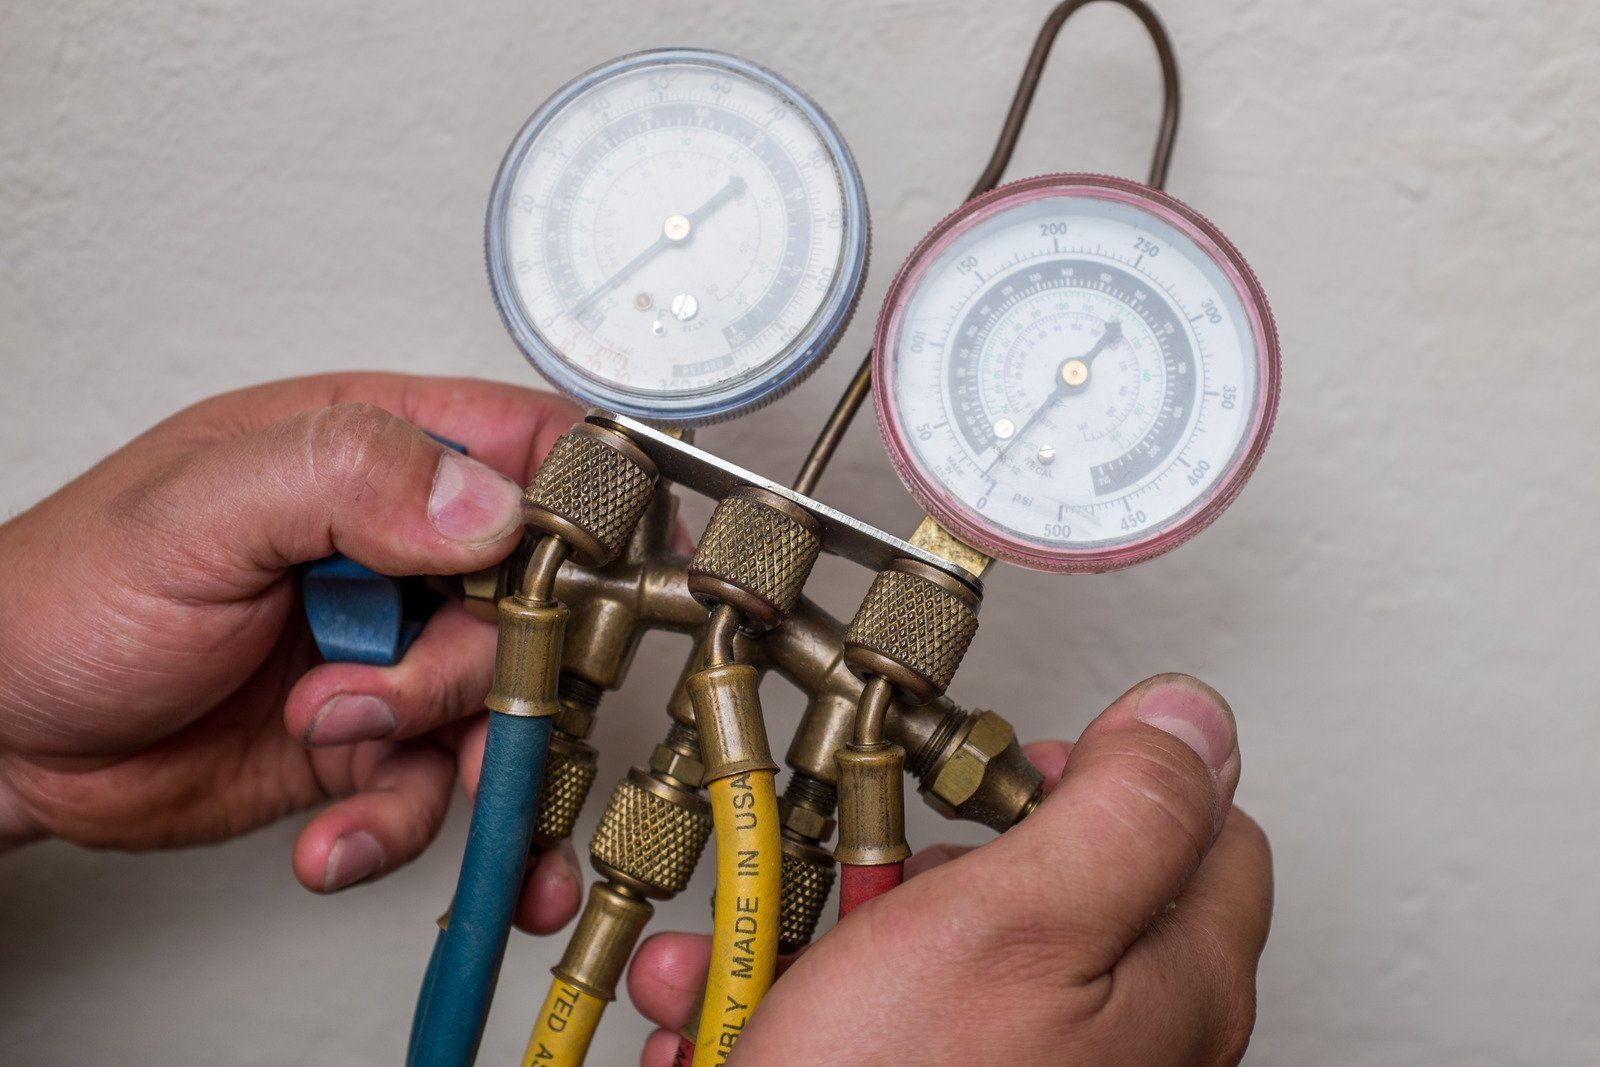 A person is holding a pressure gauge in their hands.